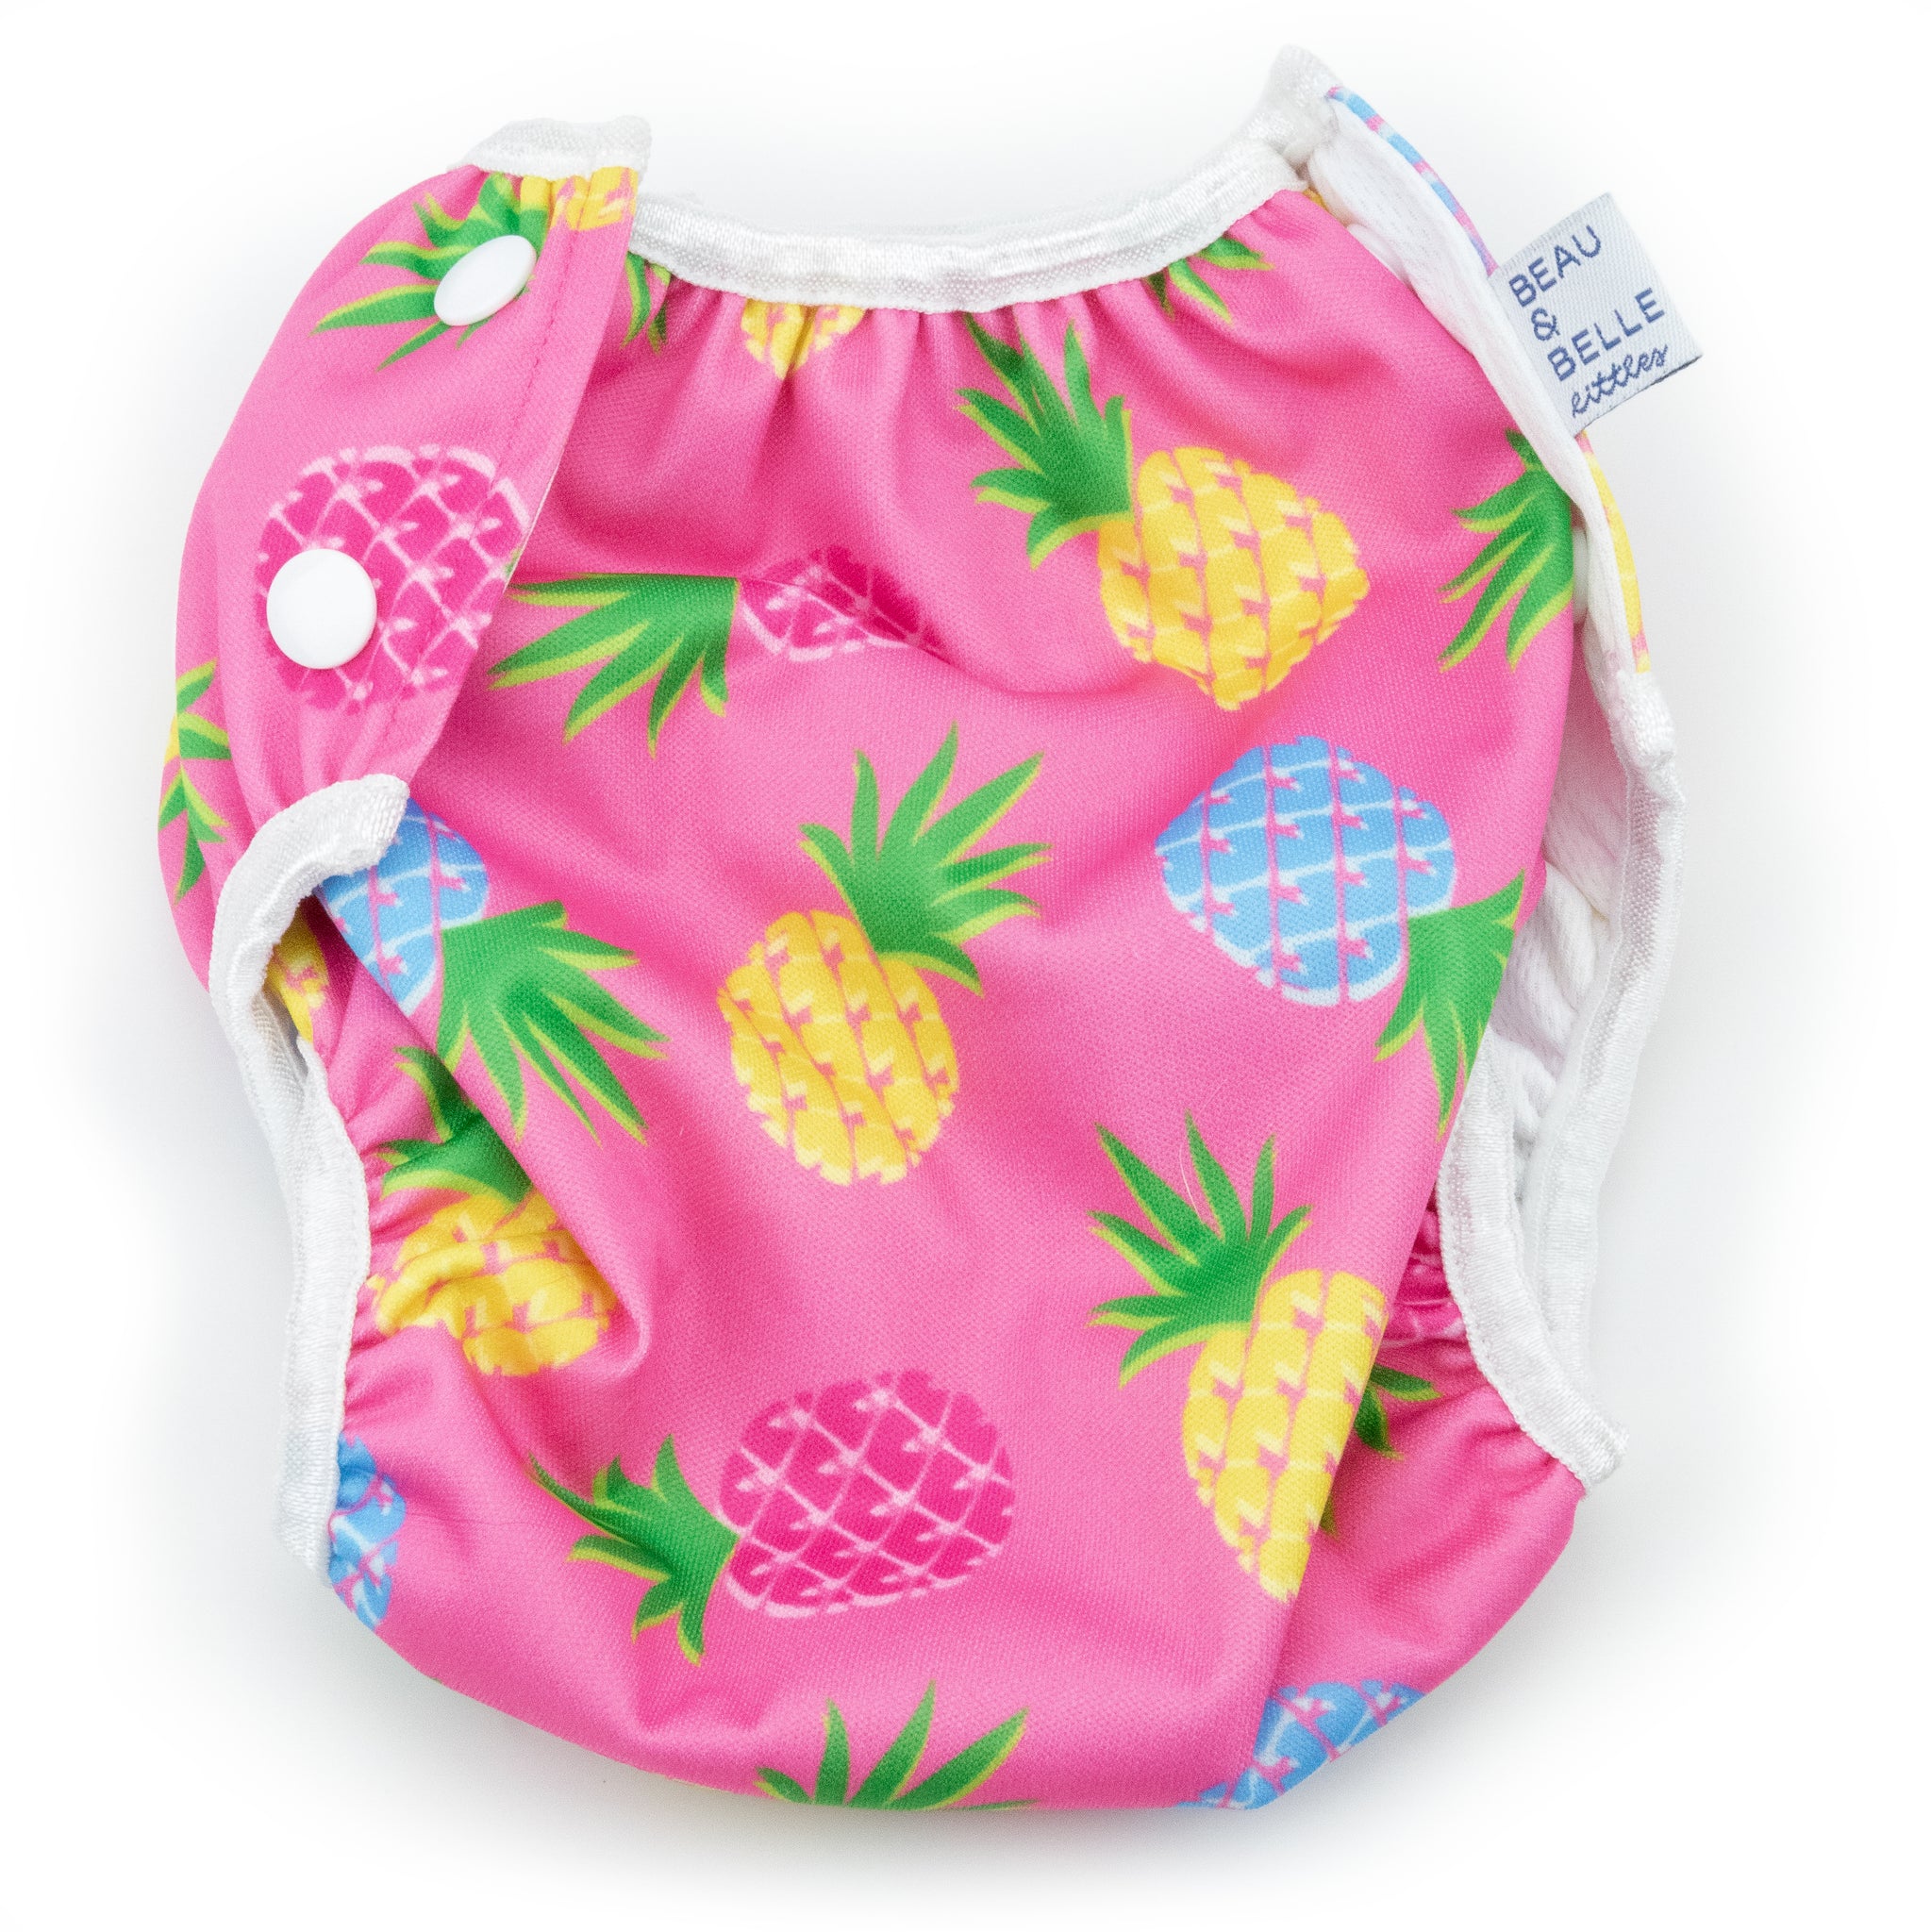 Beau and Belle Littles Swim Diaper, Regular Size, light pink background with yellow, dark pink, and blue pineapples, flat lay, back view